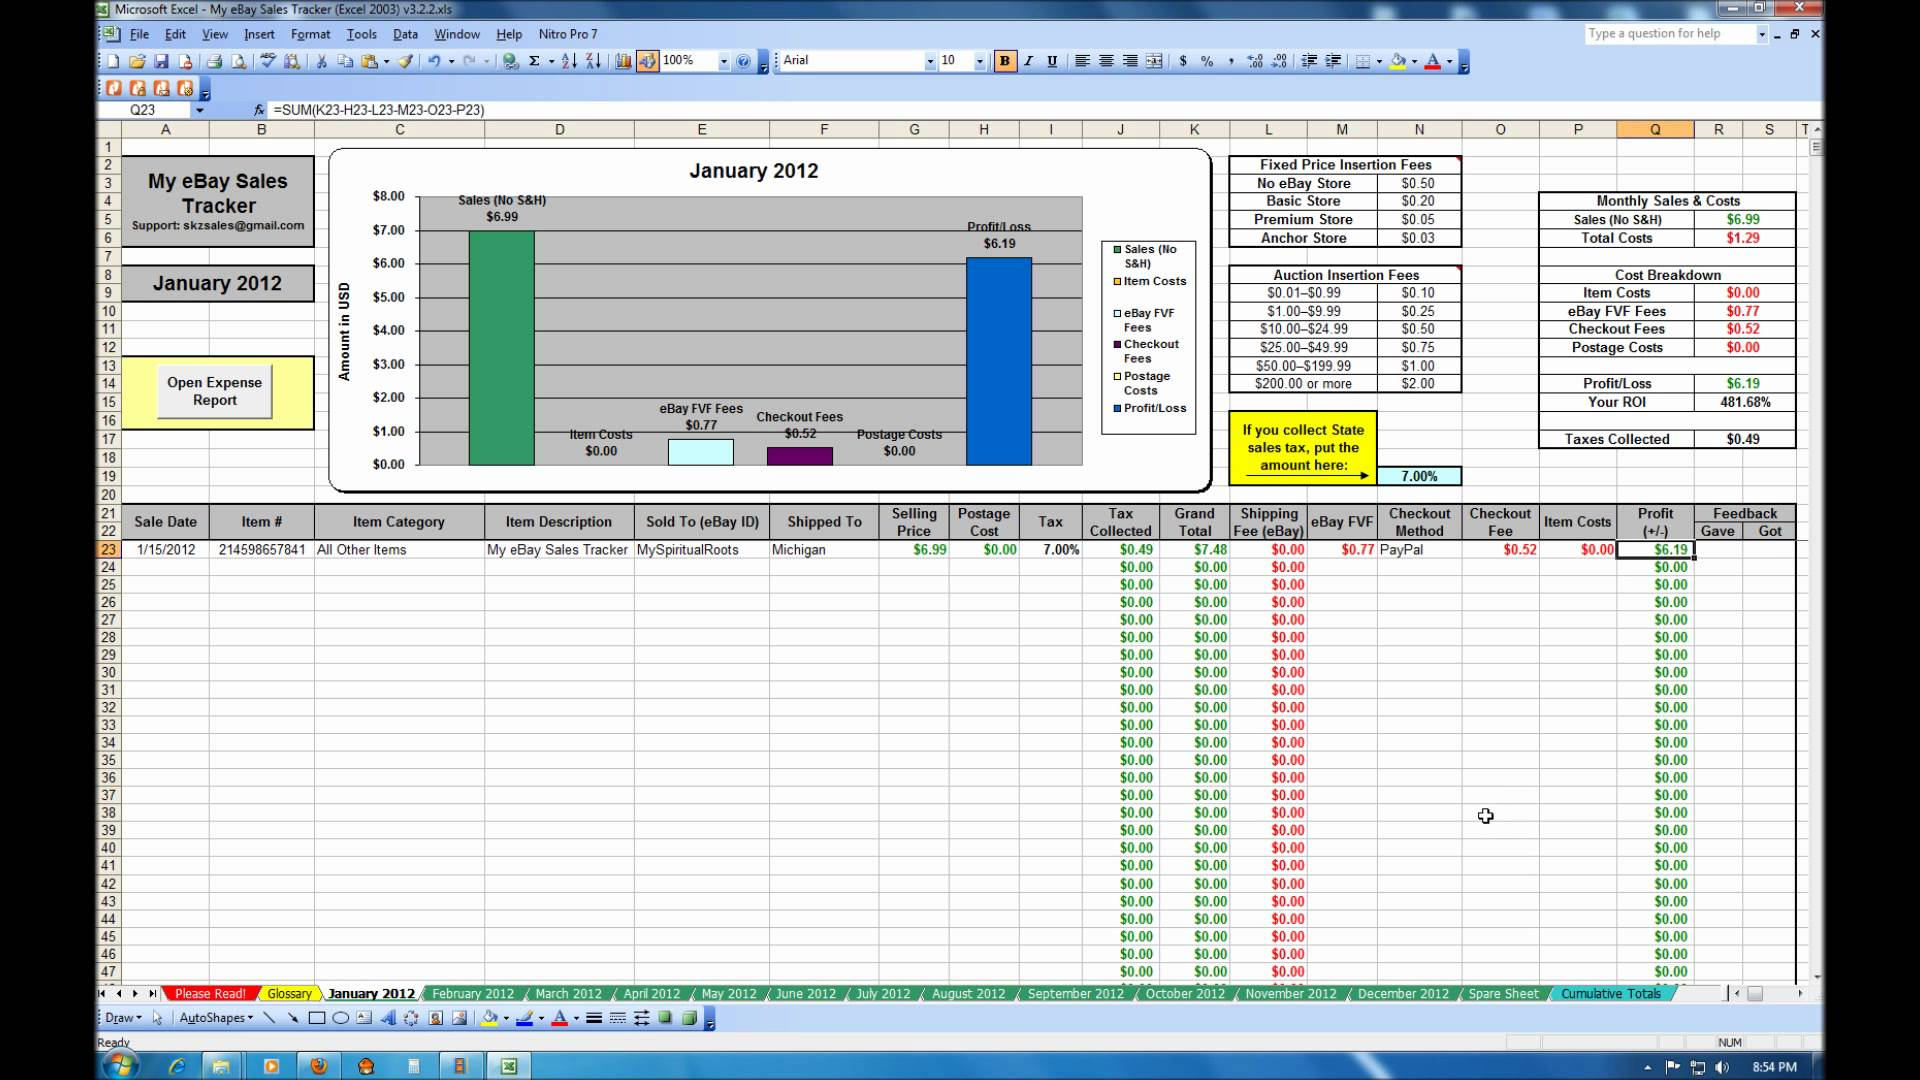 Sales Tracking Spreadsheet On Excel Spreadsheet Free Excel intended for Free Sales Tracking Spreadsheet